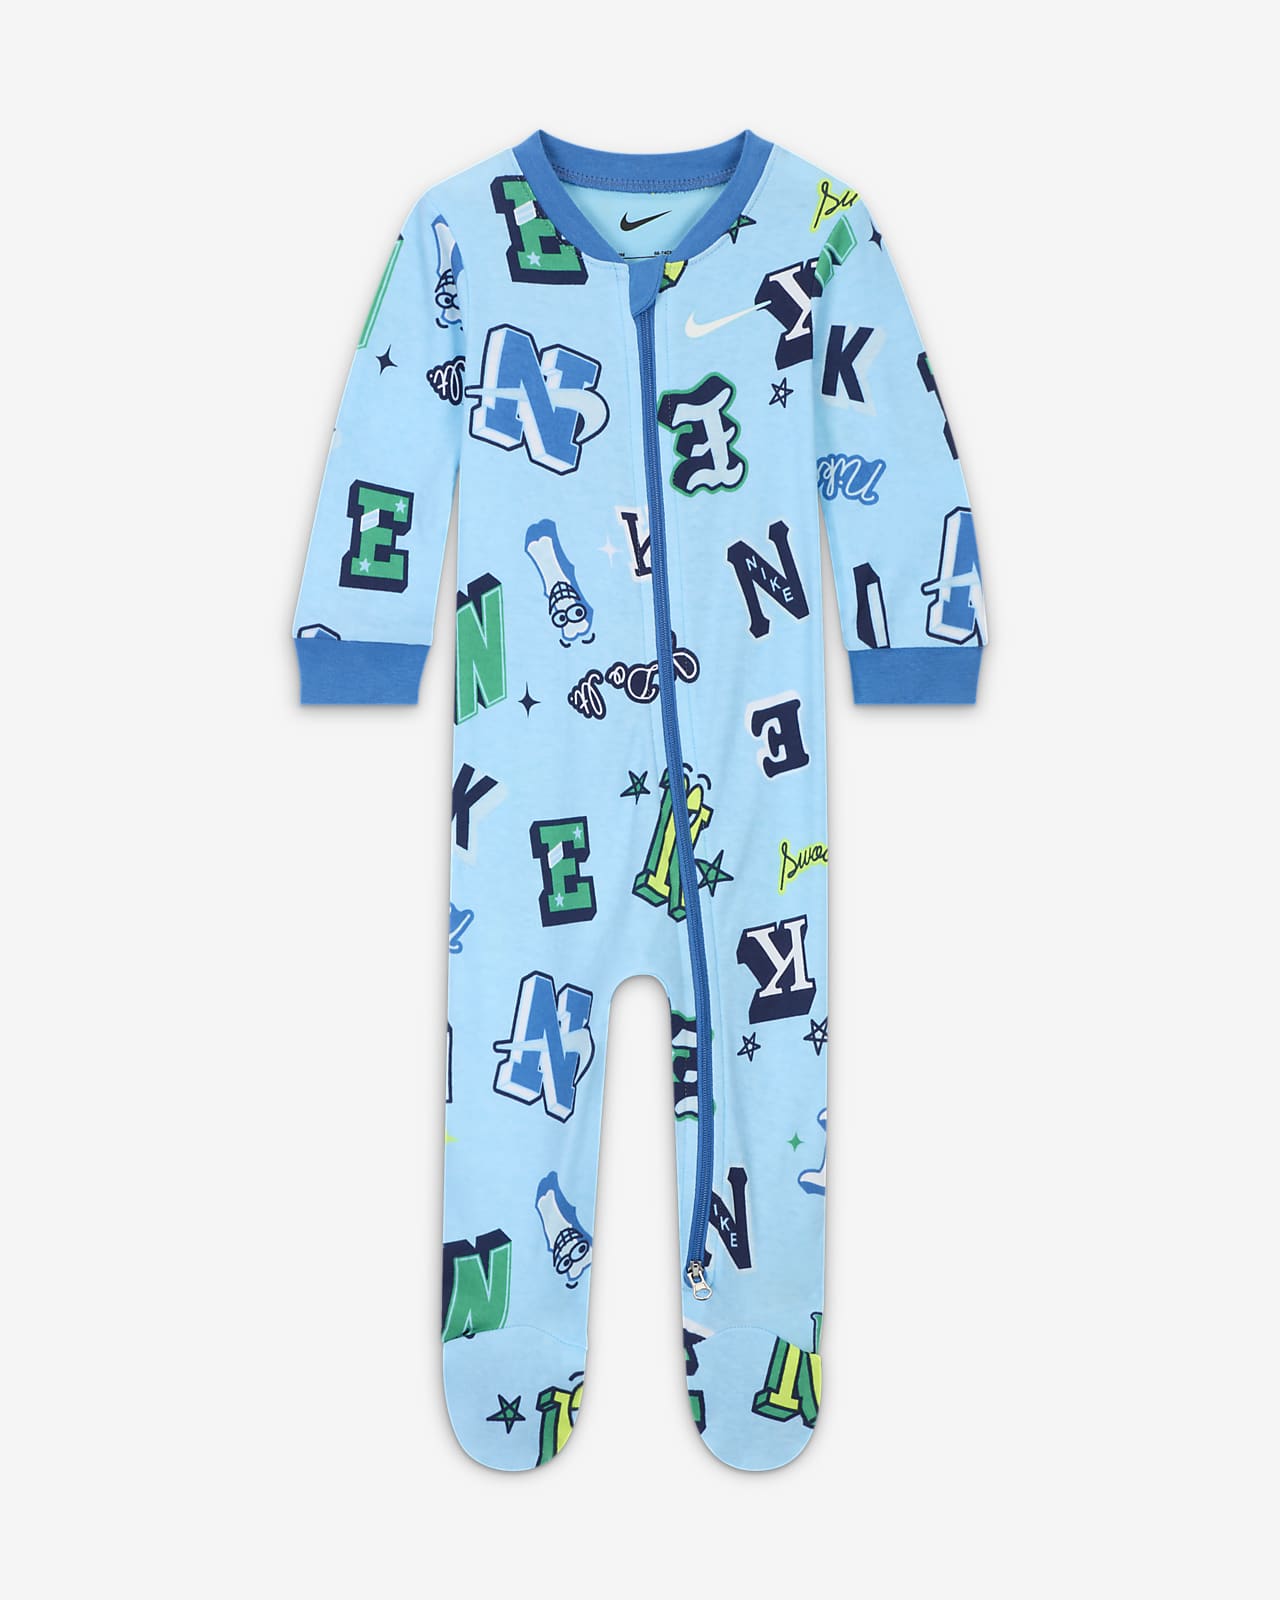 Nike Sportswear Next Gen Baby (0-9M) Footed Coverall